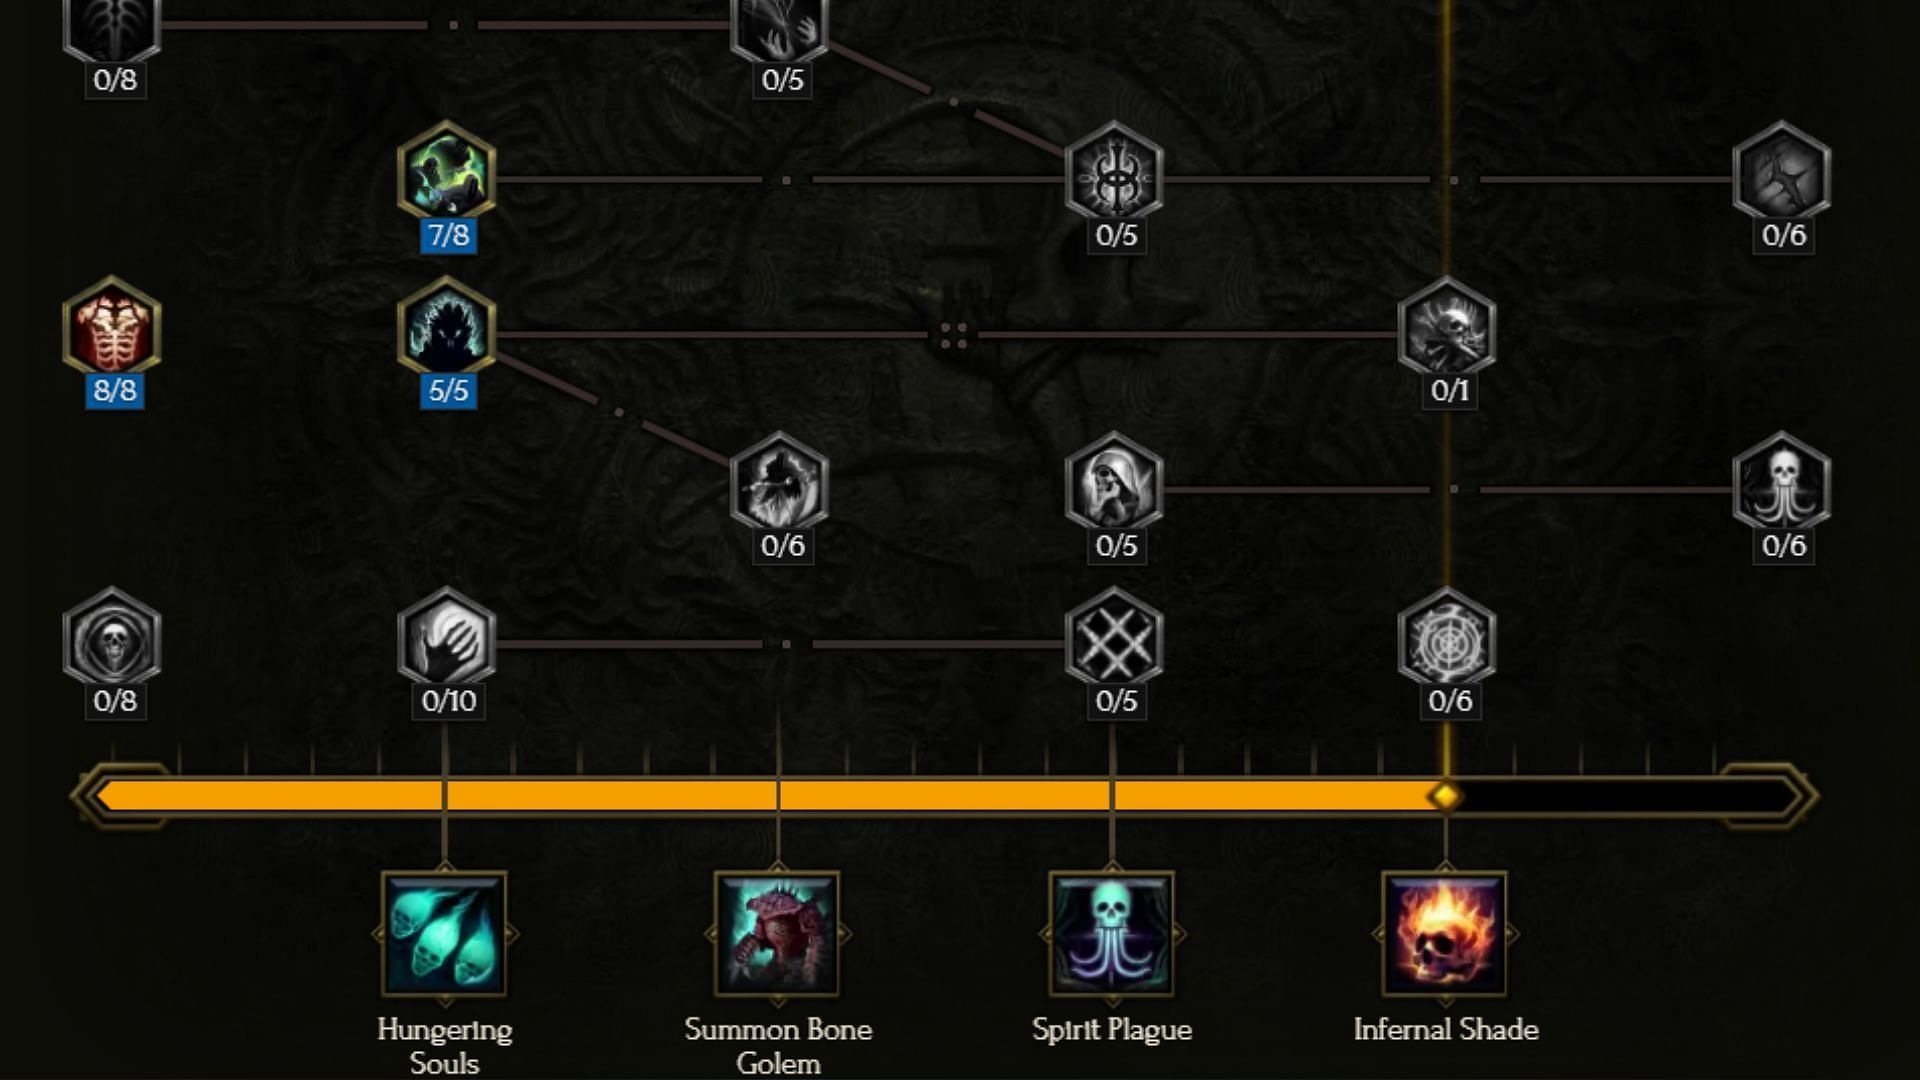 This build summons Flame Wraiths instead of regular Wraiths (Image via Eleventh Hour Games)